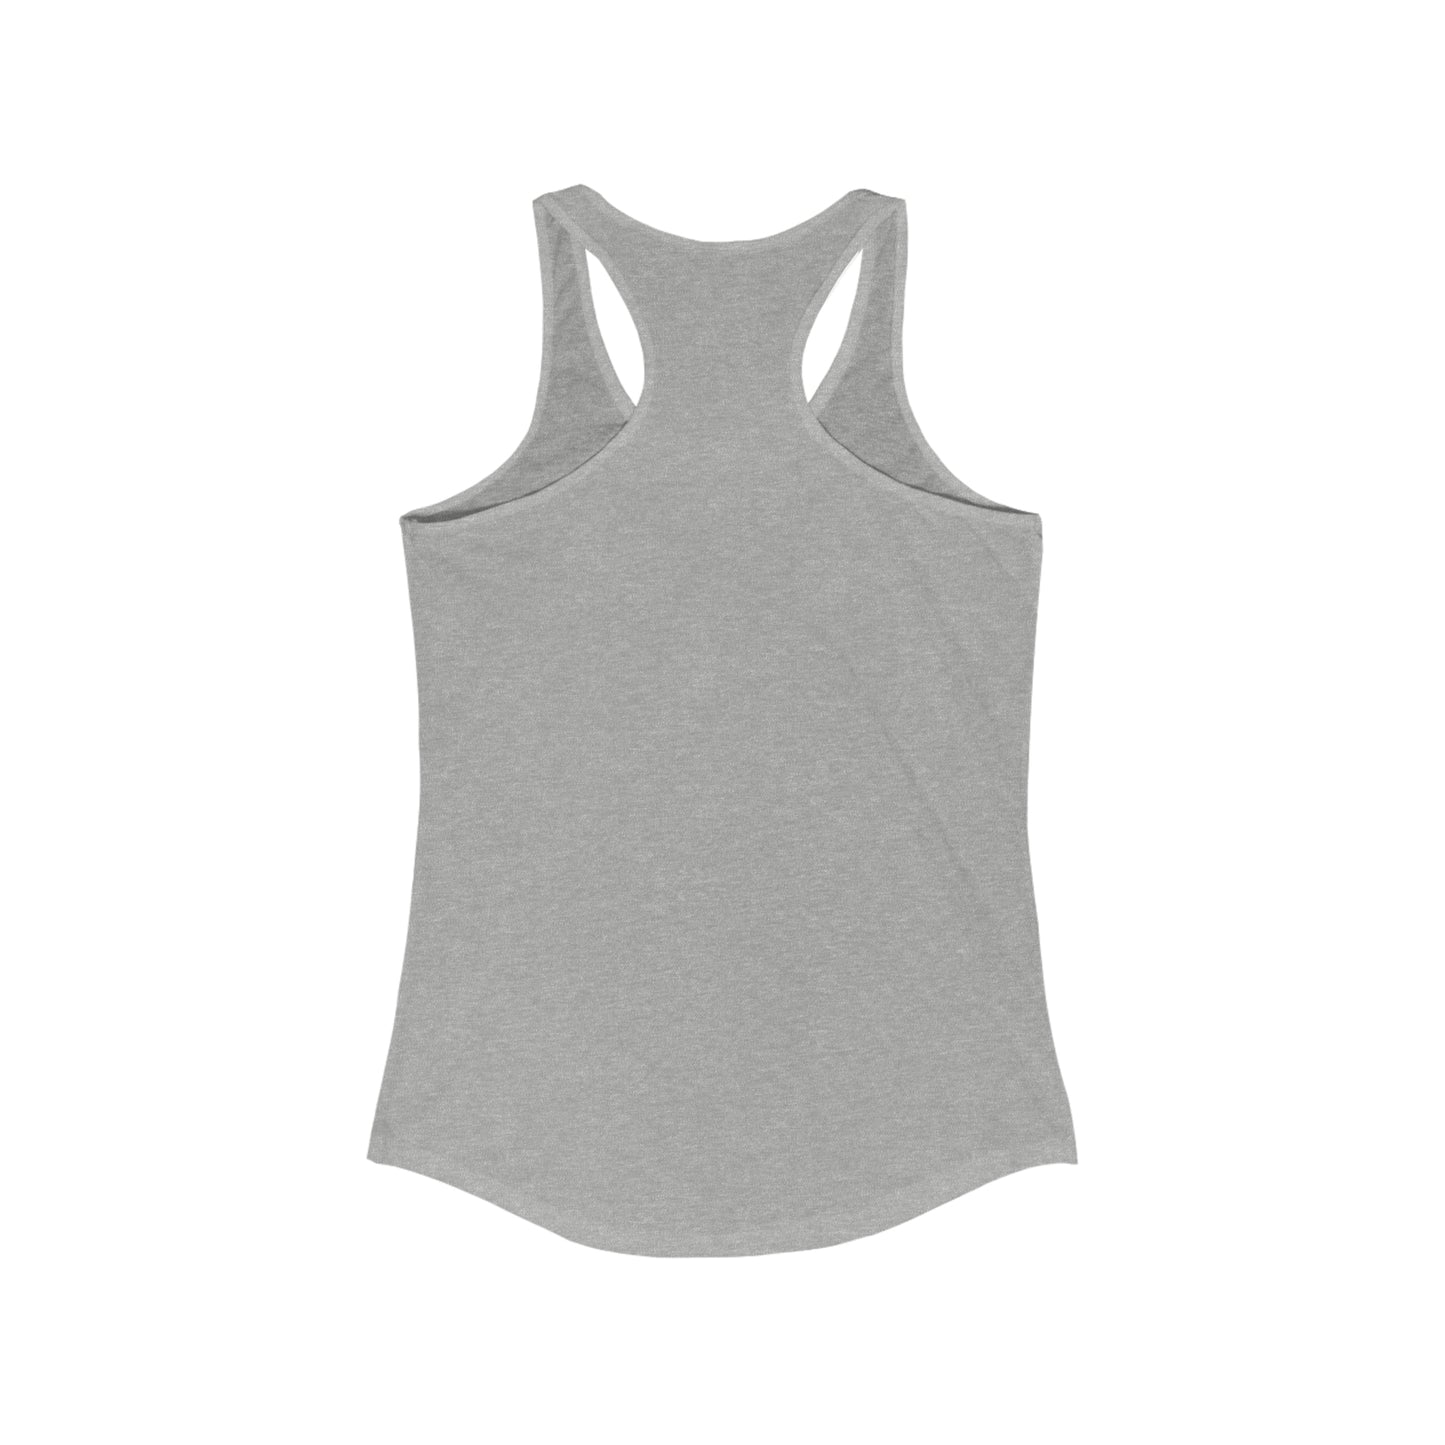 Silver Without Regrets, Women's Ideal Racerback Tank